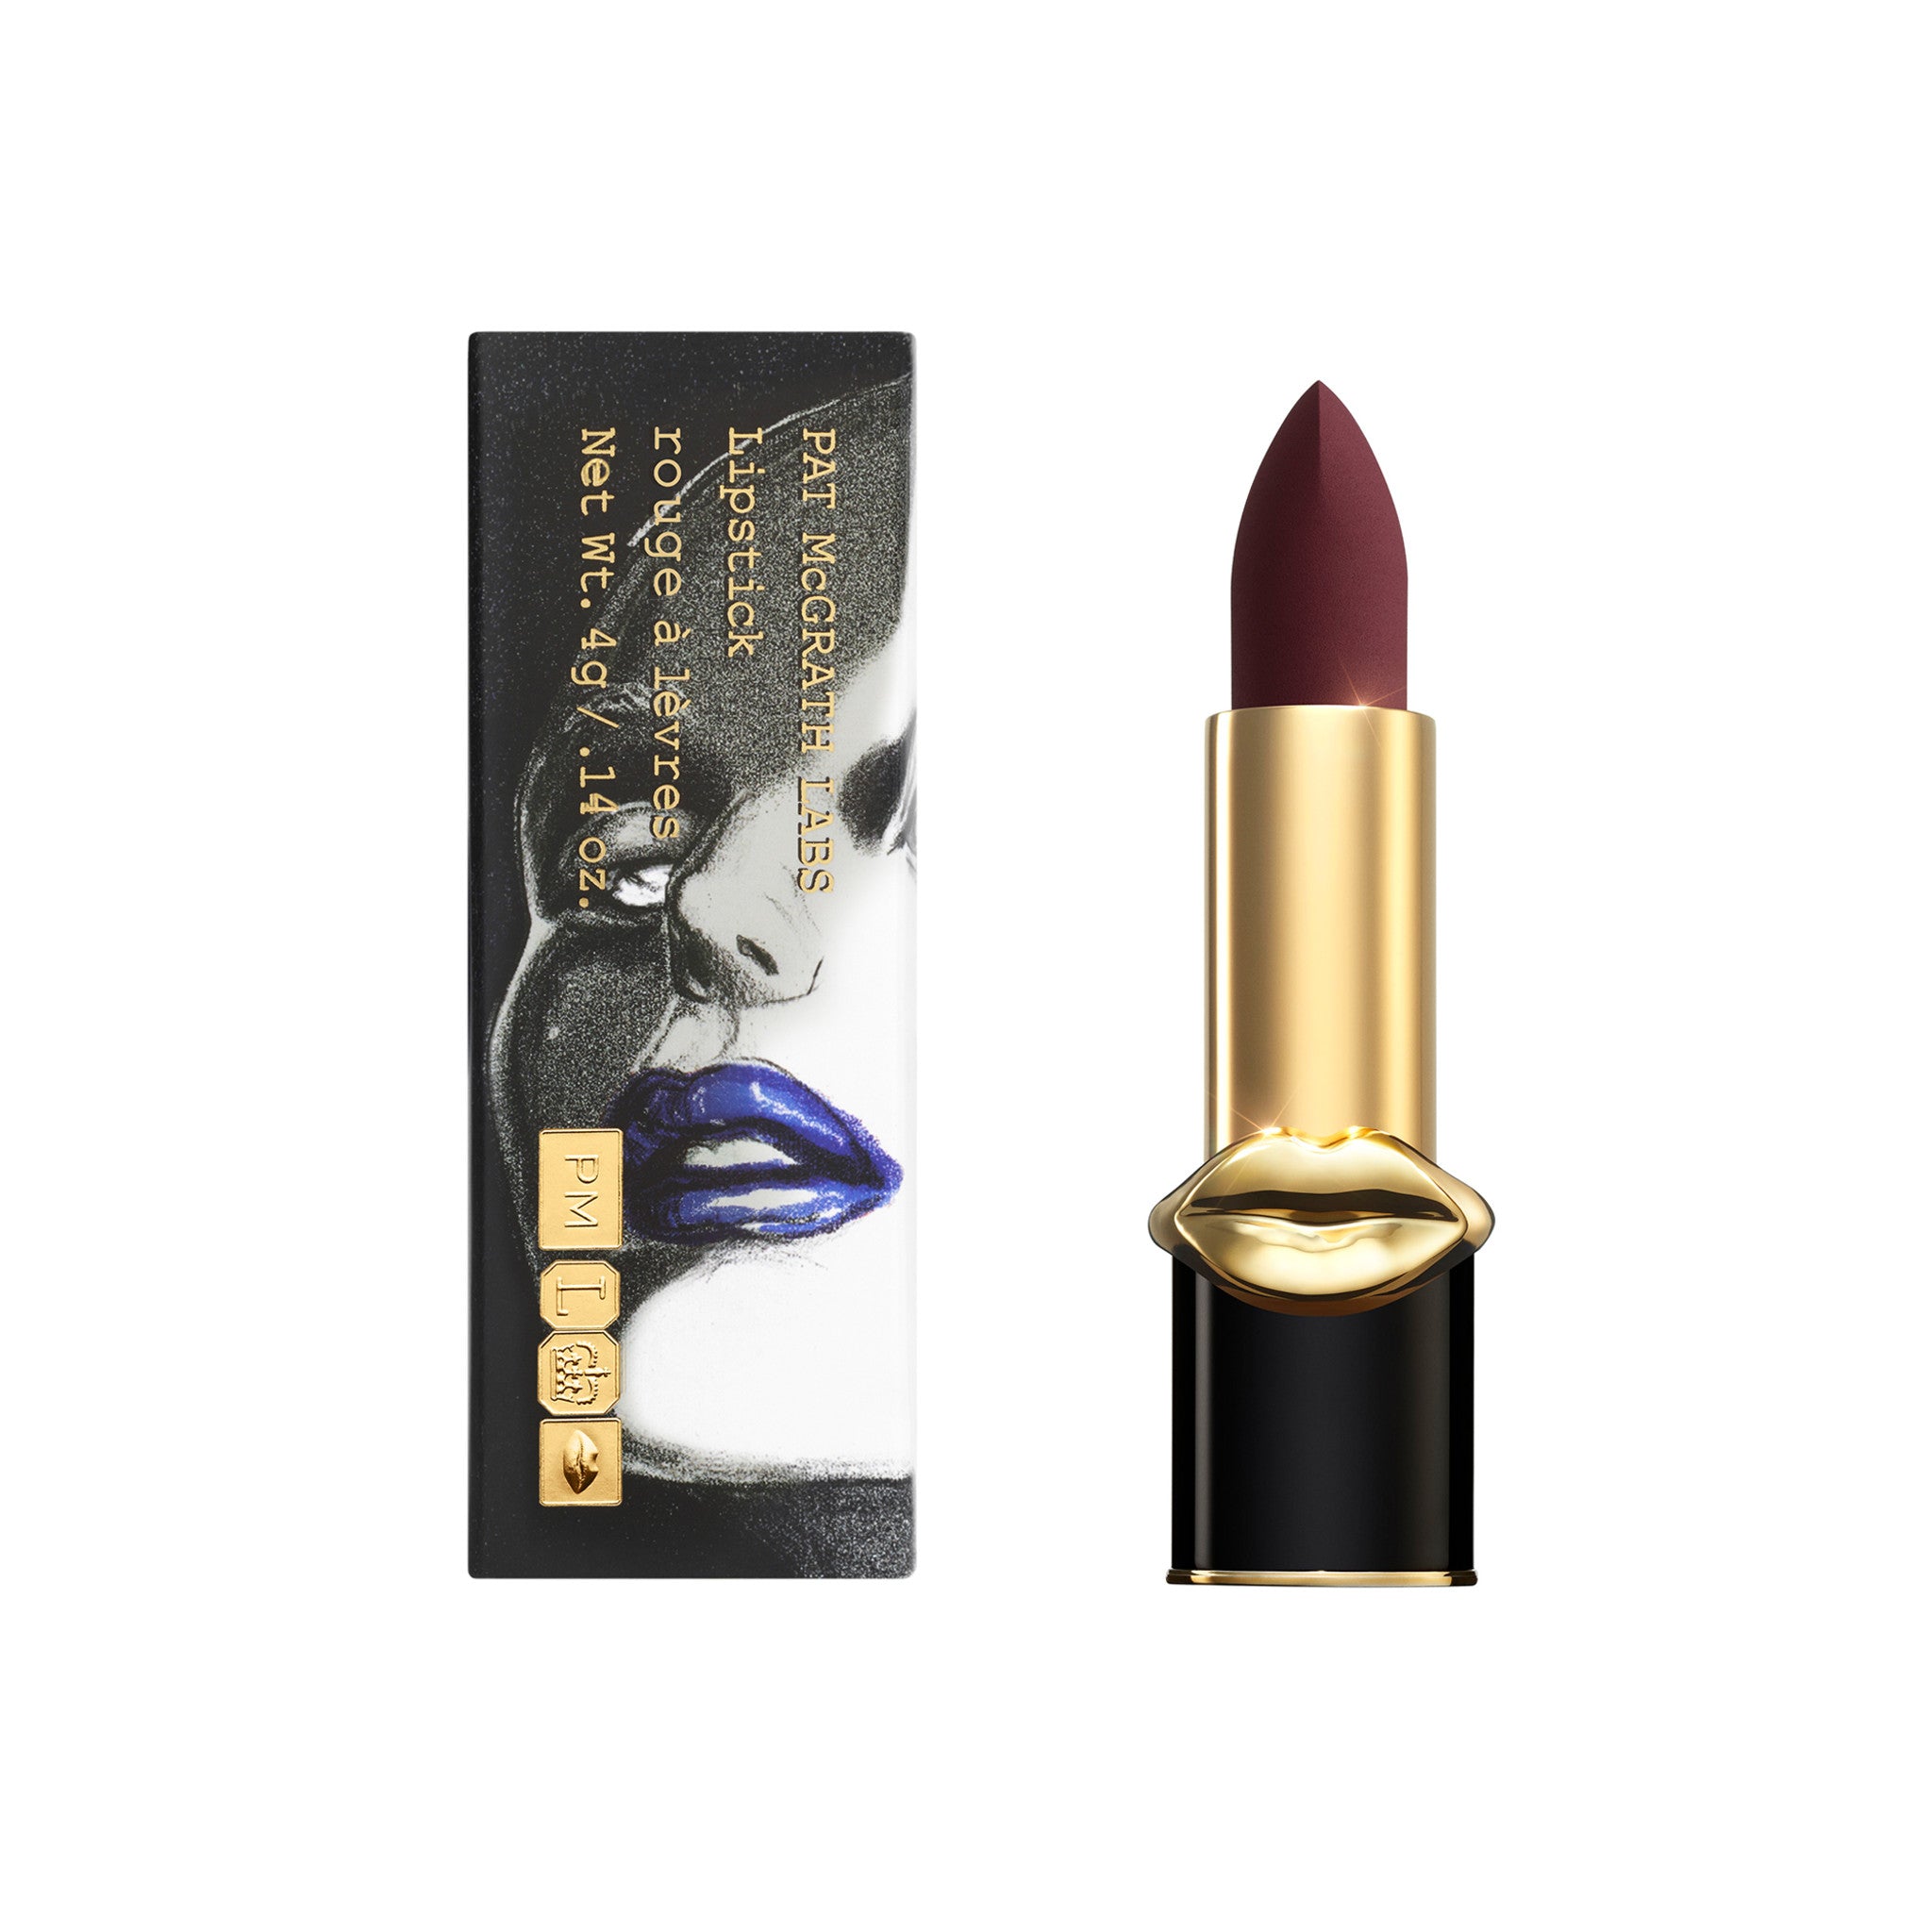 Pat McGrath Labs MatteTrance Lipstick Color/Shade variant: Mcmenamy main image. This product is in the color purple